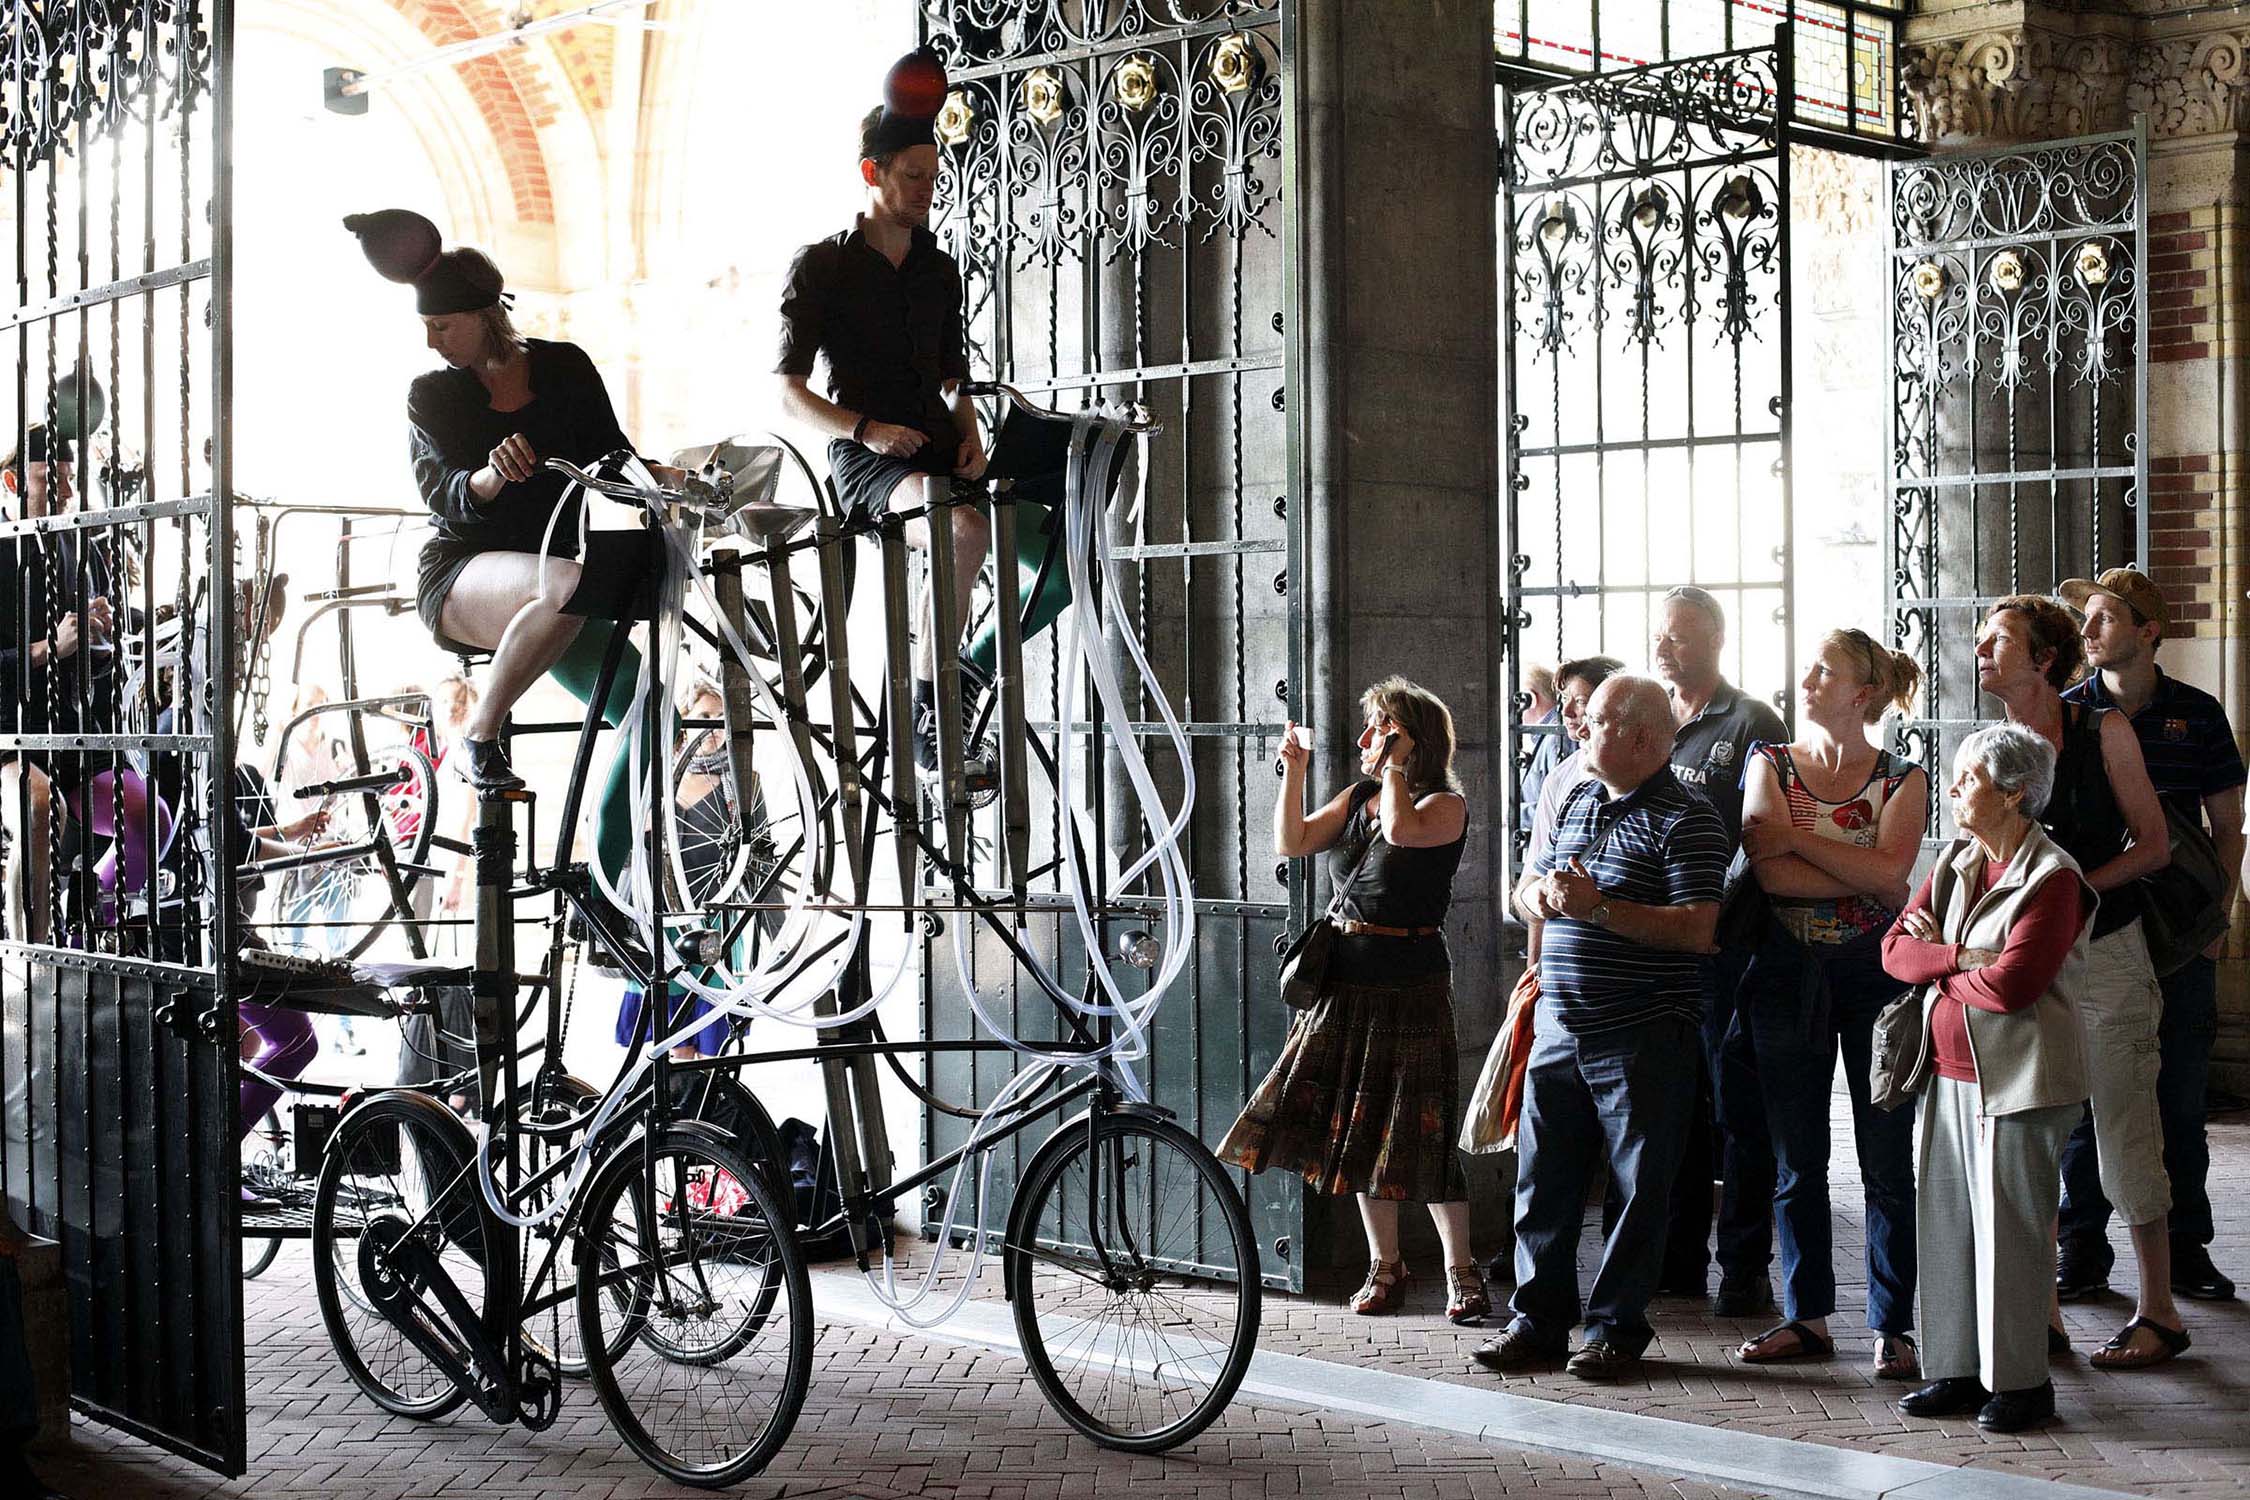 Music Theater performance and bike installation Cyclophonia during Holland Festival at the Rijksmuseum passage Amsterdam